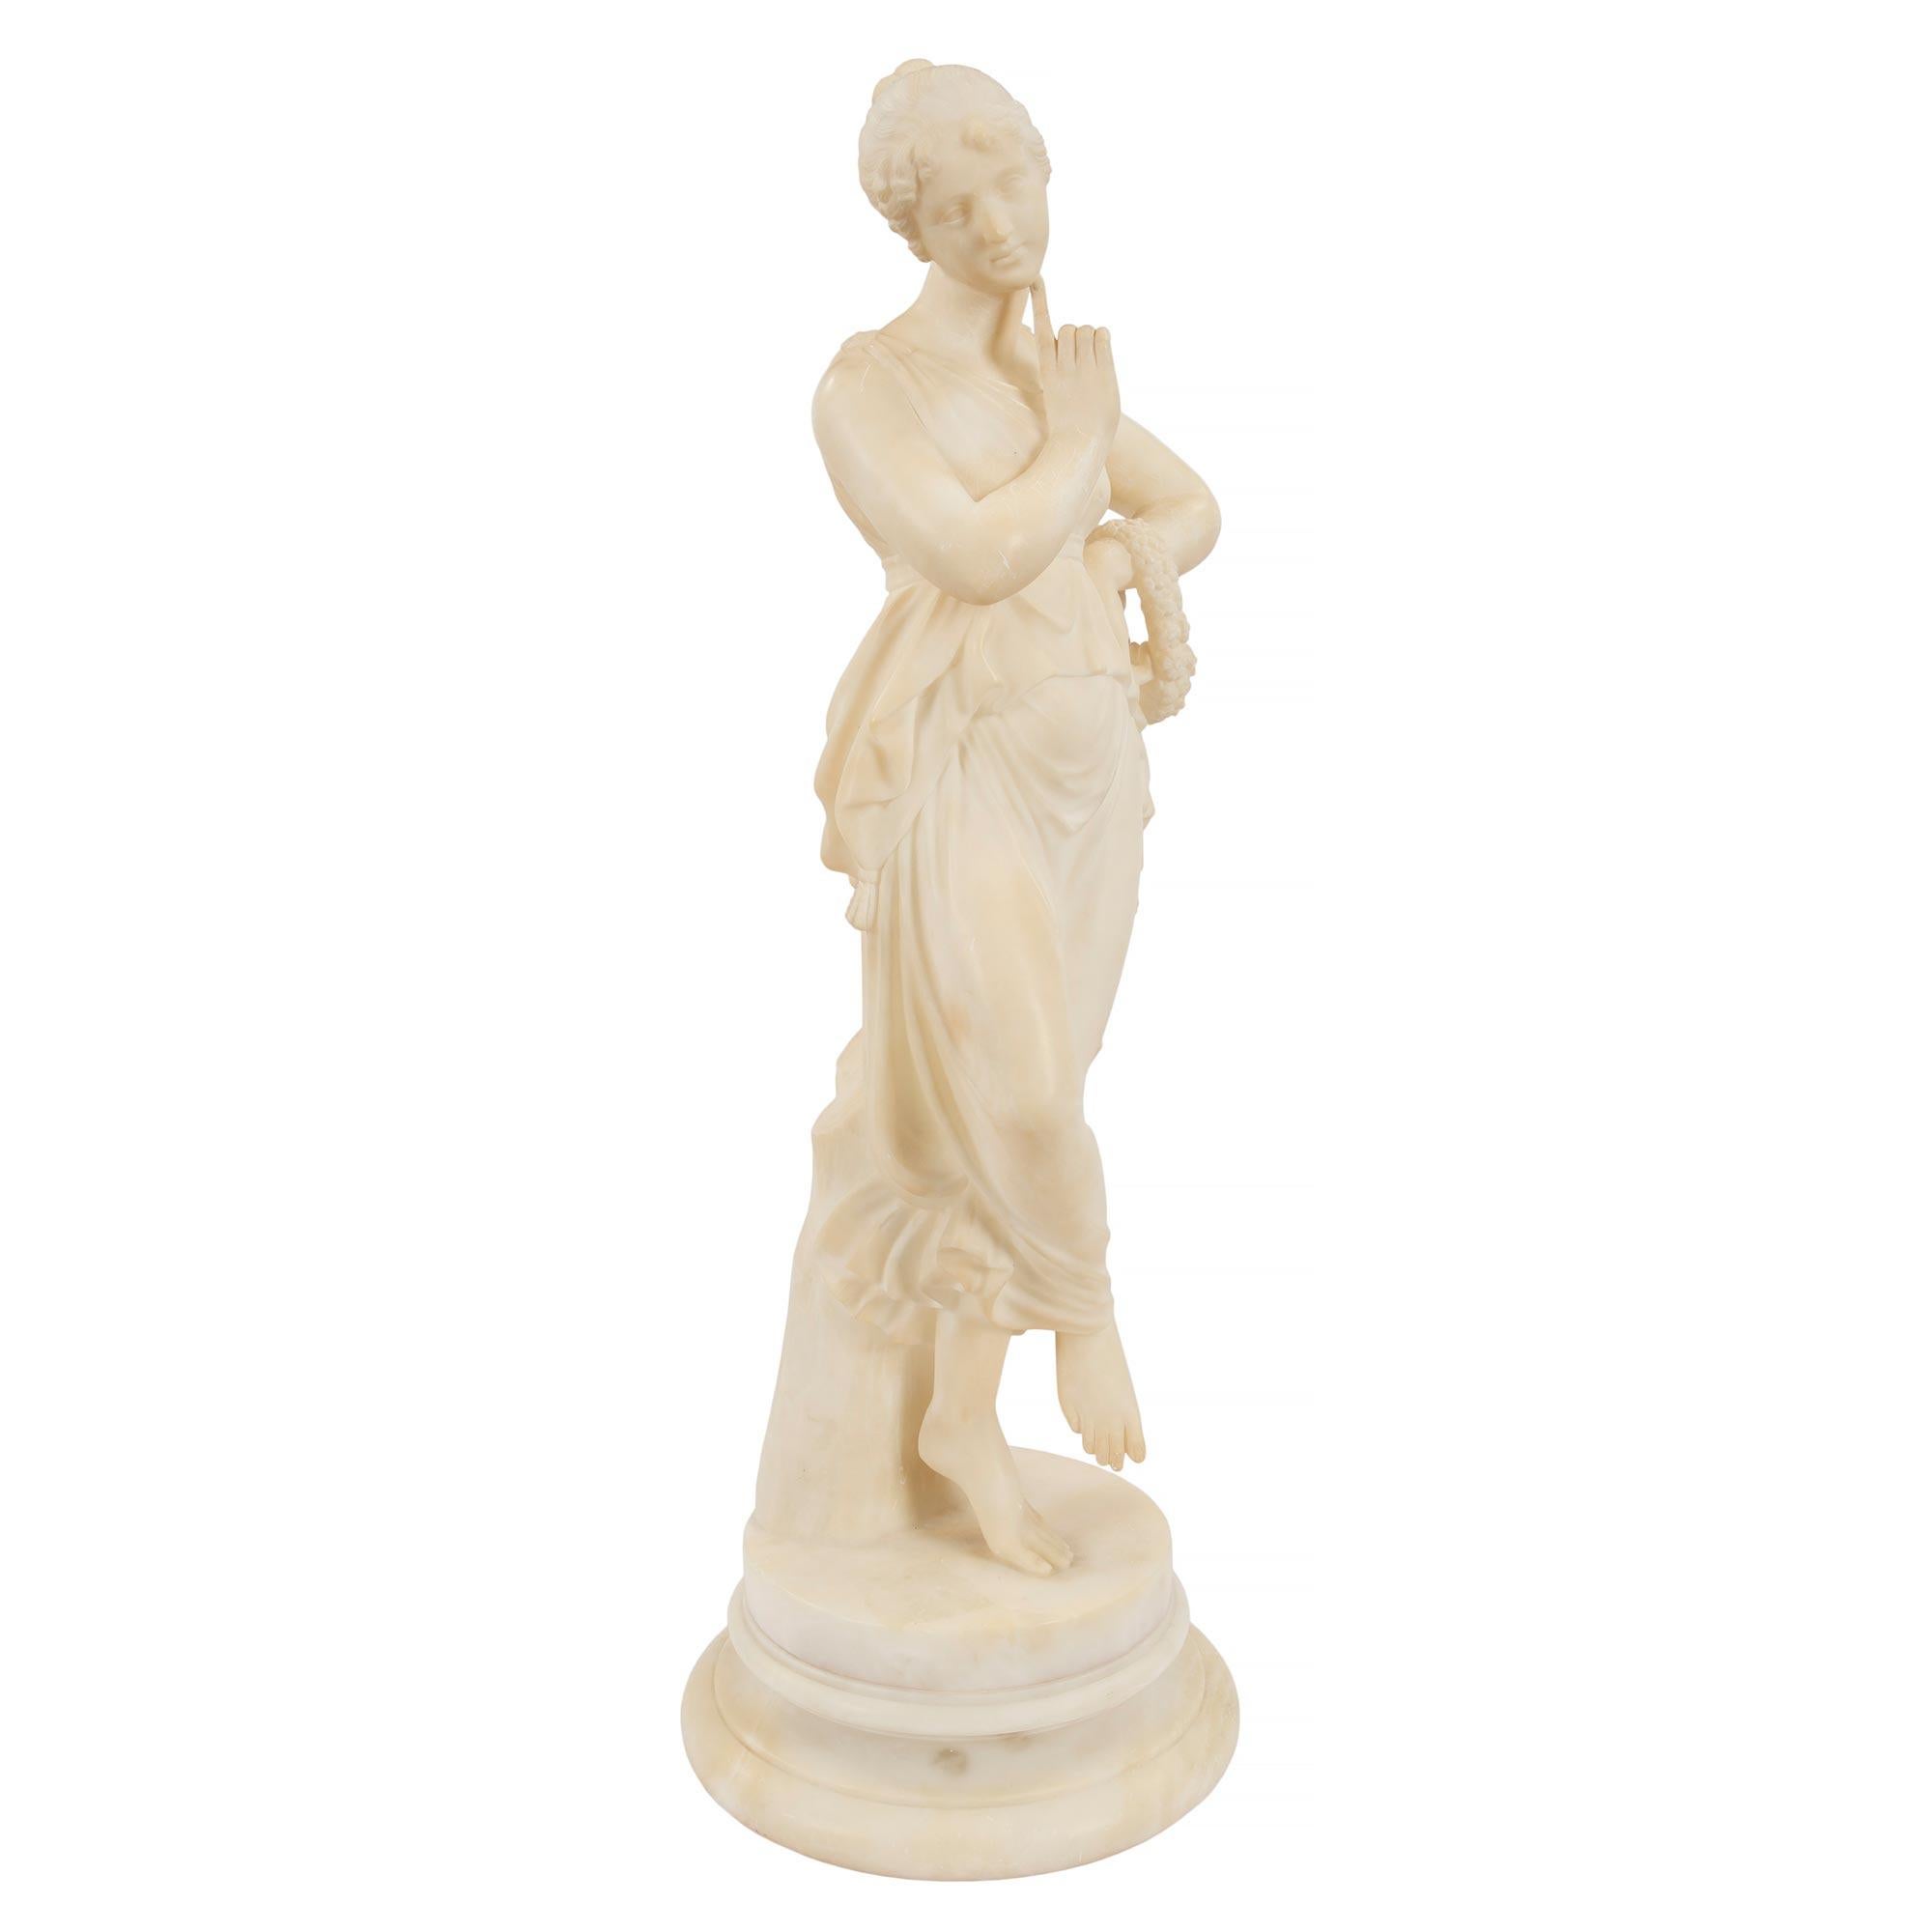 A most elegant Italian 19th century neoclassical style alabaster statue of a maiden. The statue is raised by a circular mottled base where the beautiful maiden stands. She is dressed in wonderfully sculpted period attire with one hand on her hip